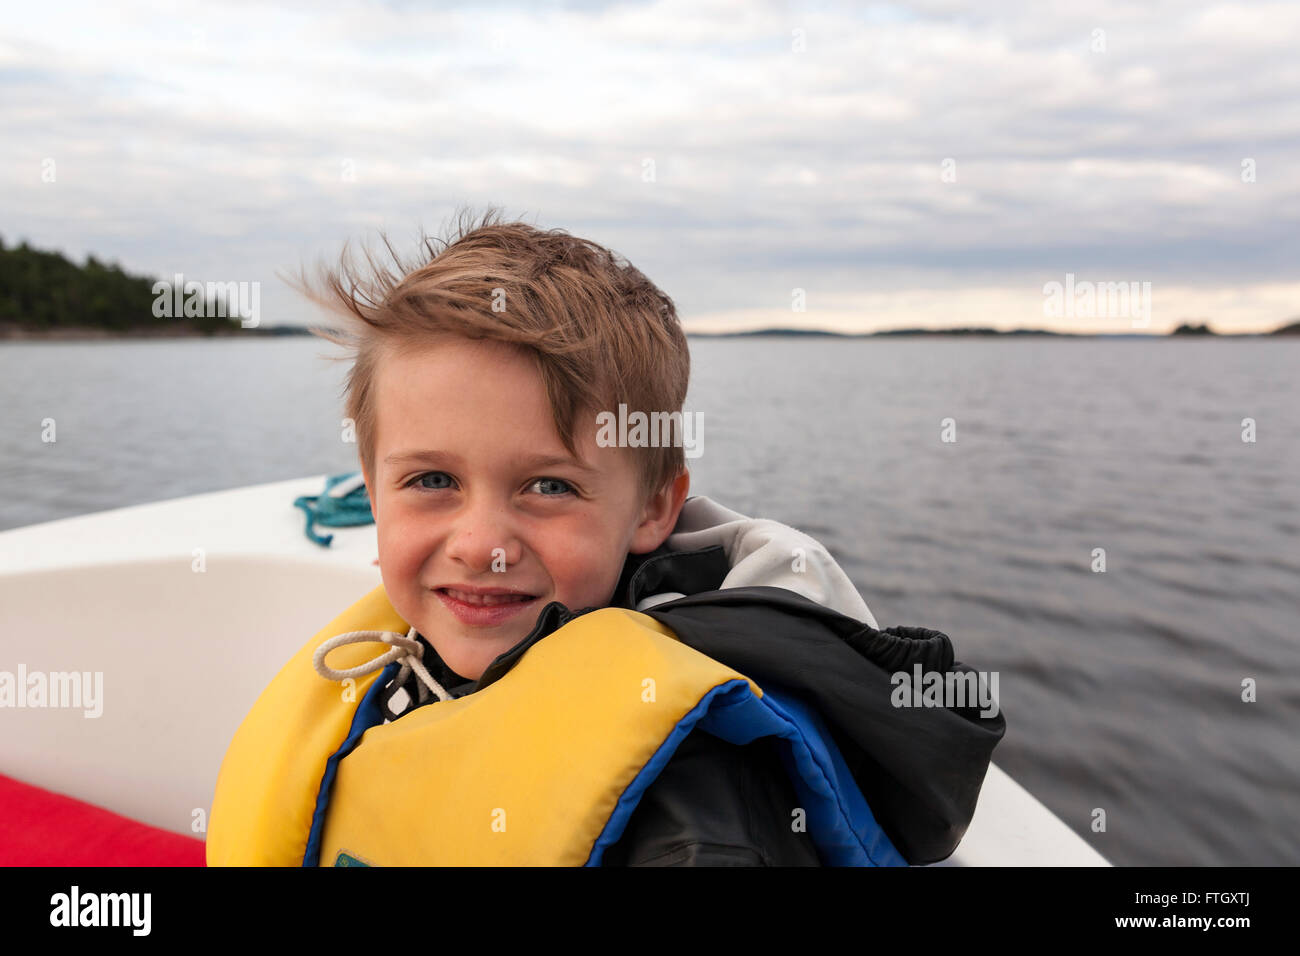 Young boy wearing a life vest at the front of a motor boat at sea looking at camera  Model Release: Yes.  Property Release: No. Stock Photo